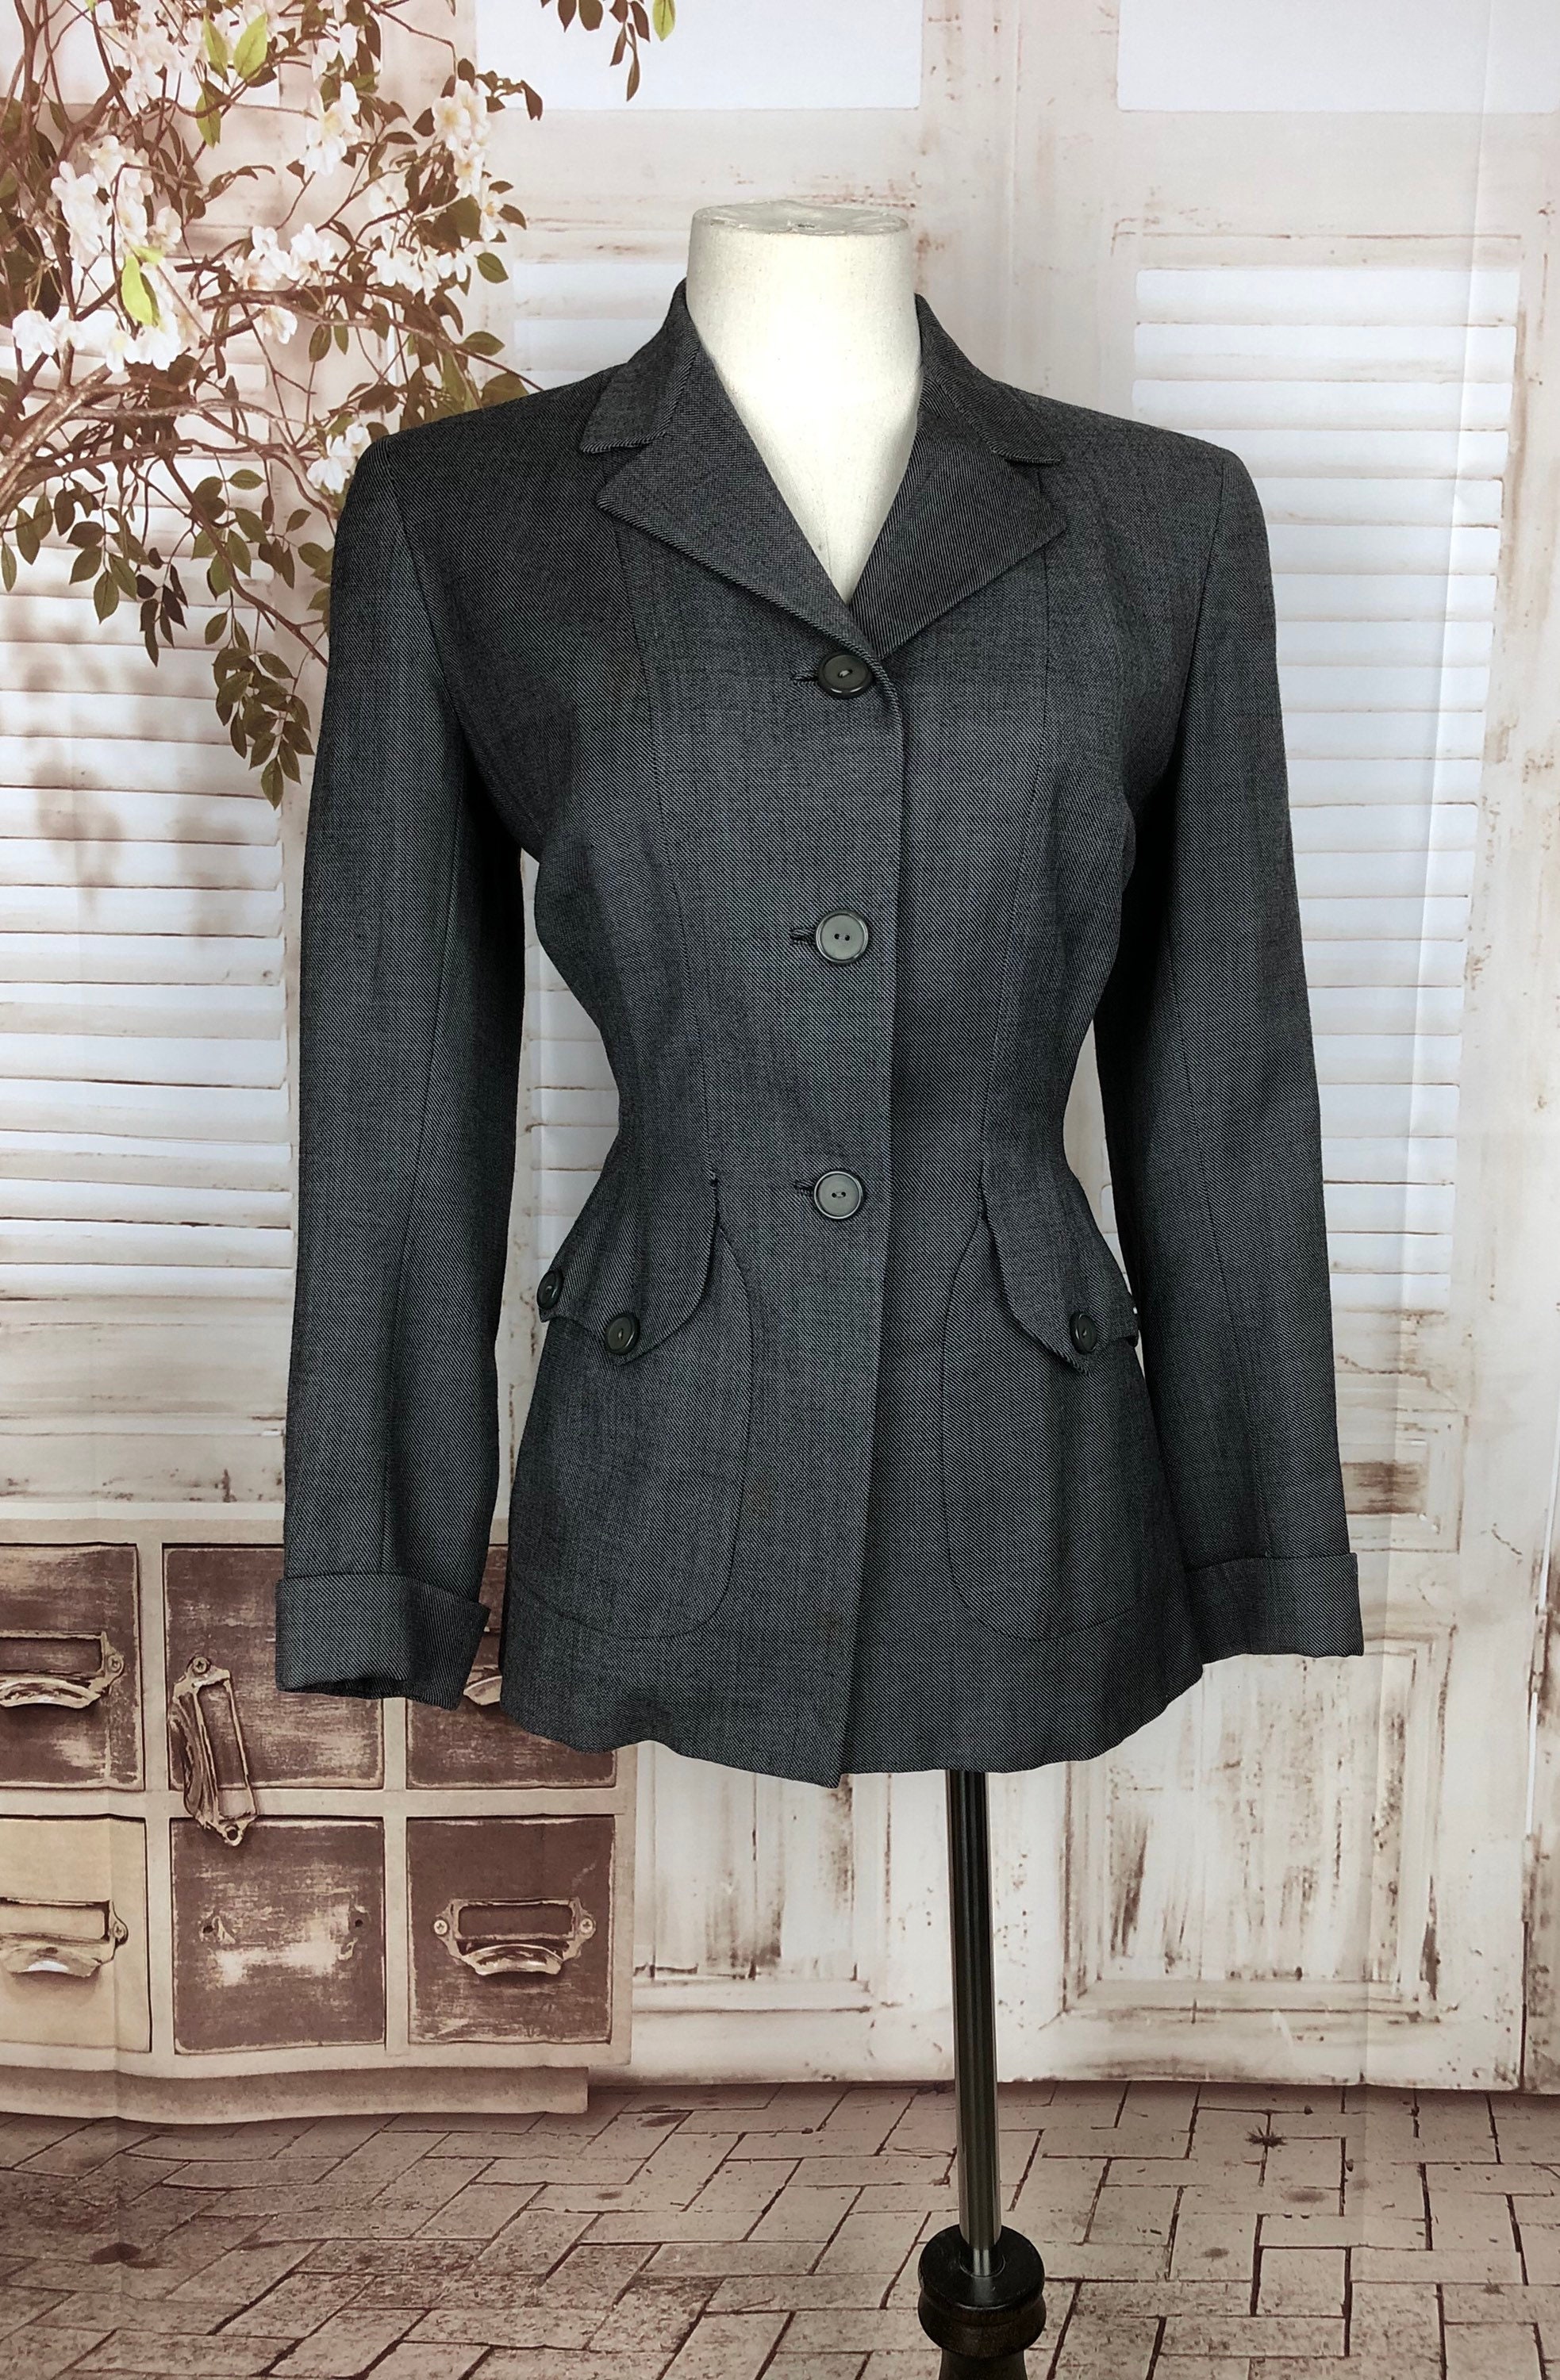 Original 1940s 40s Grey Wool Suit Jacket With Gorgeous Pockets | Etsy